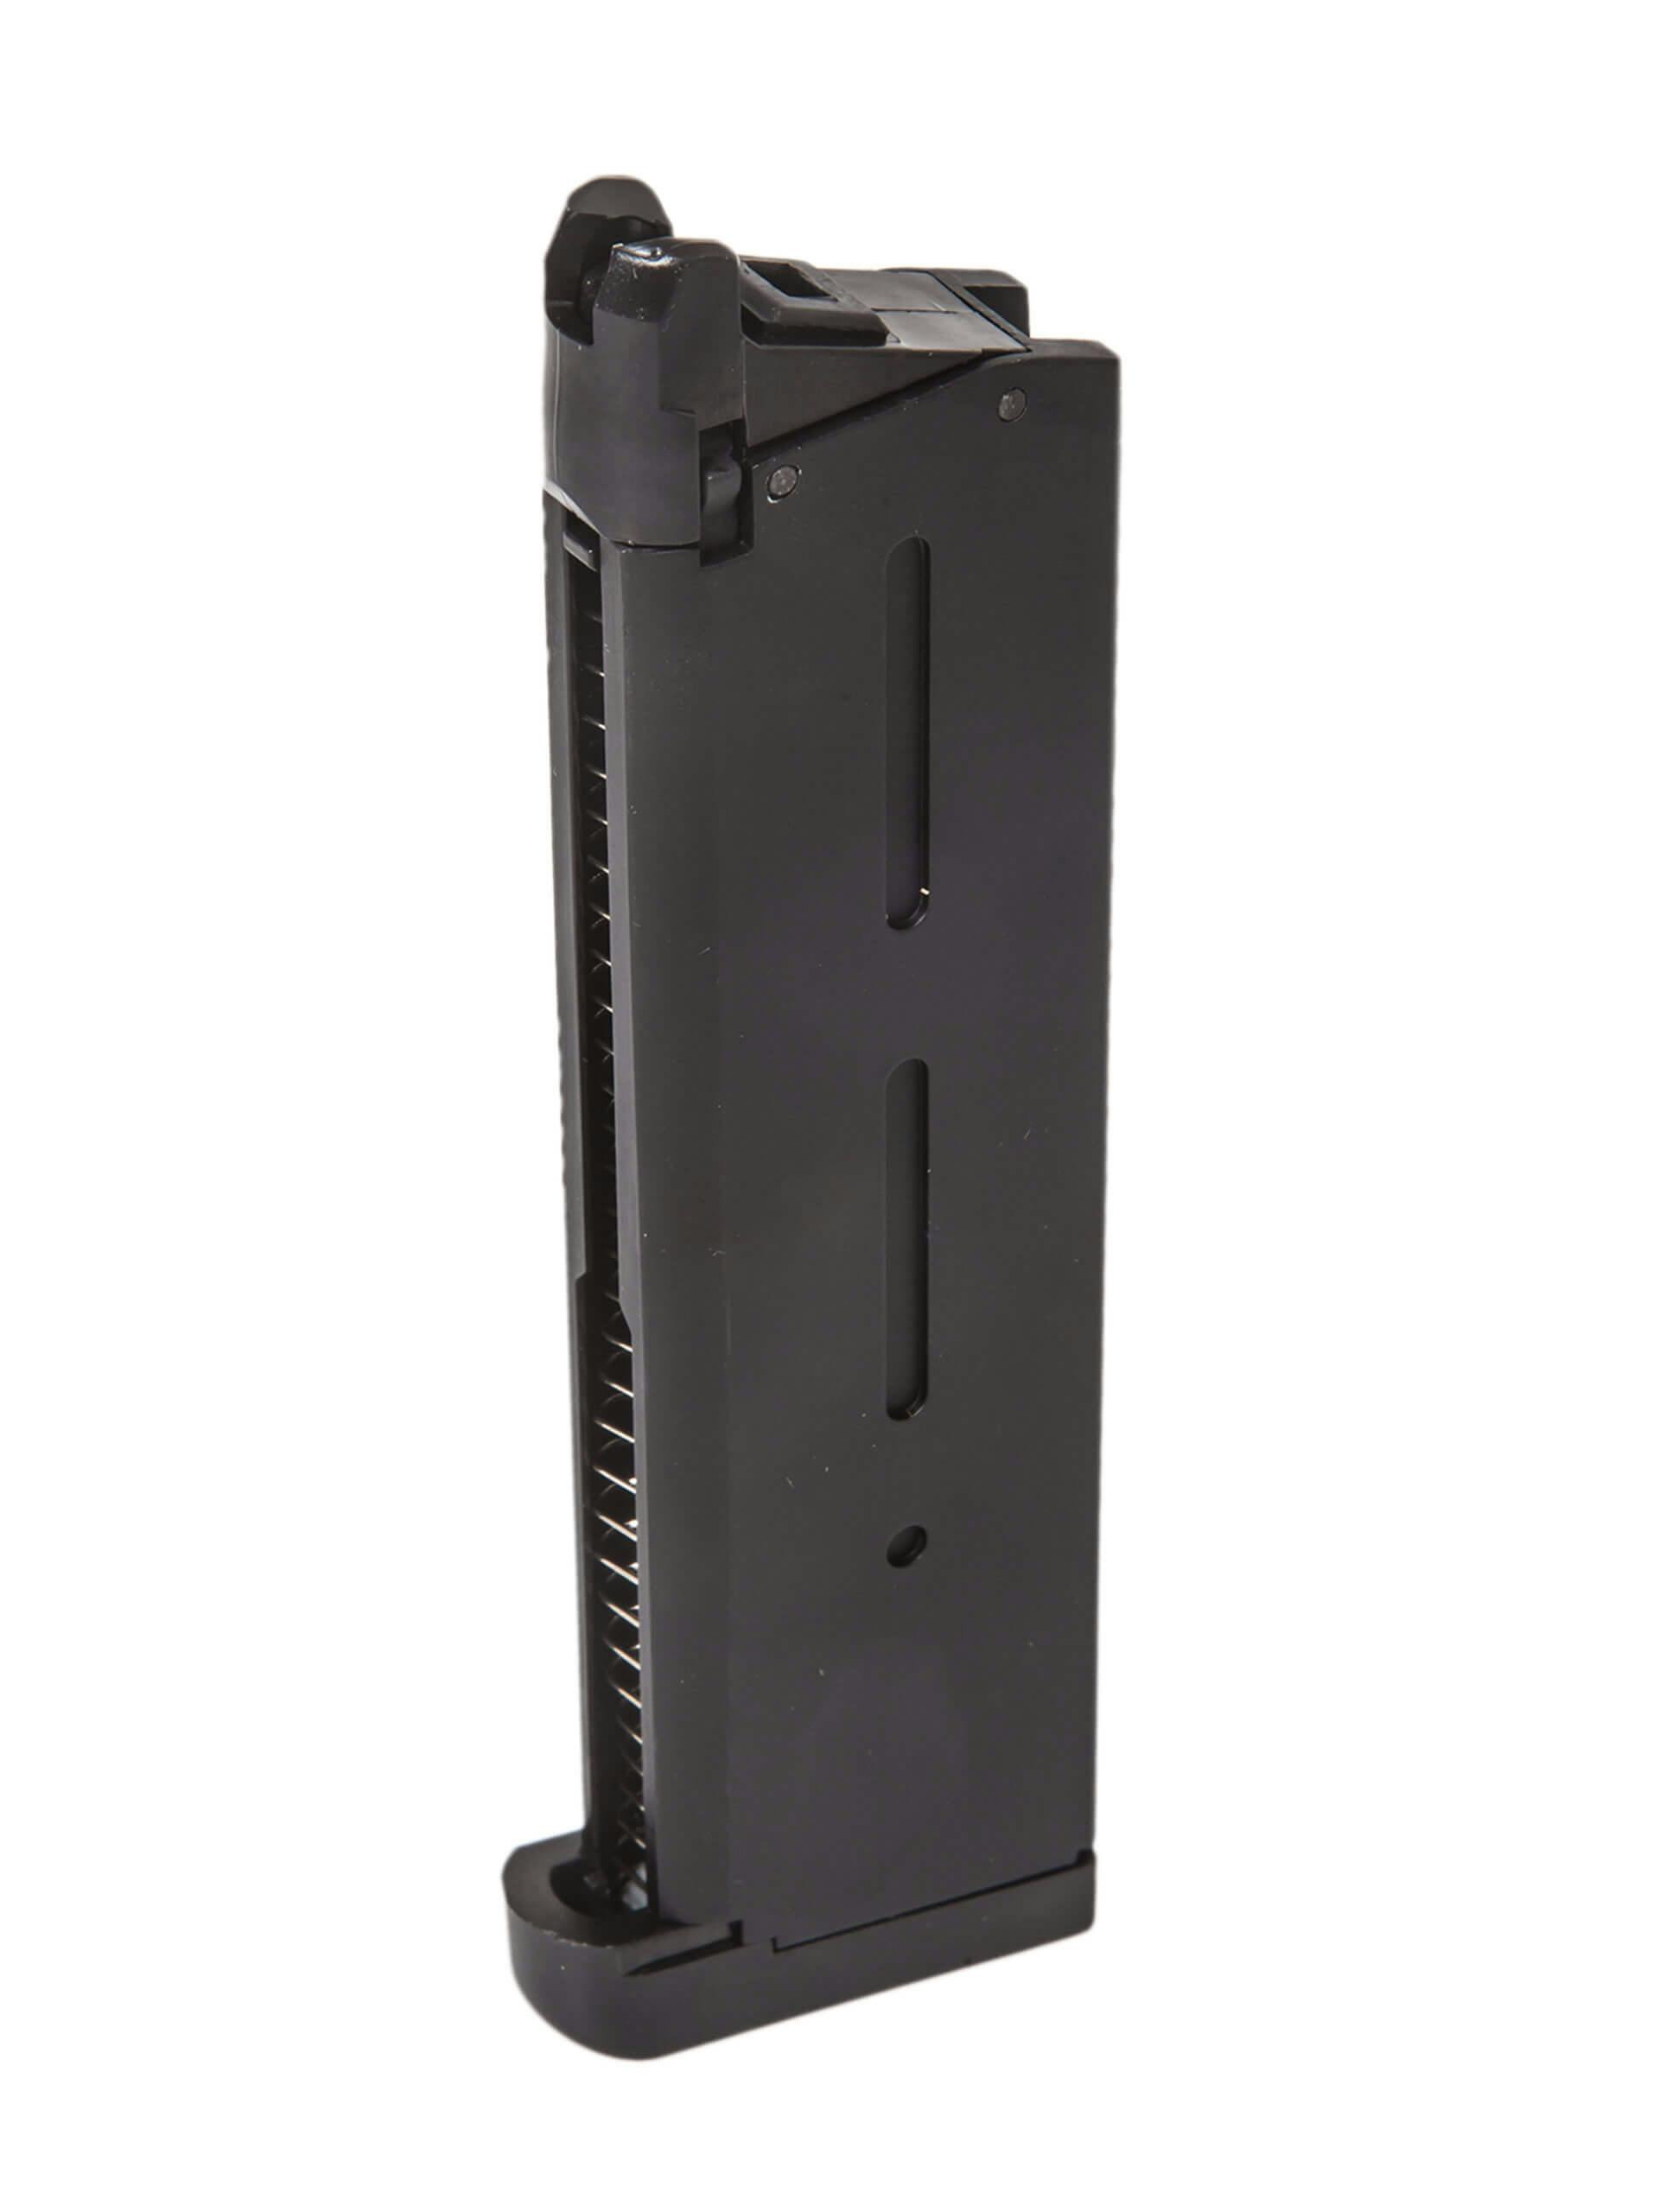 Lancer Tactical Army Armament 25 Round Standard Gas Blowback Airsoft Magazine for R-Series 1911 